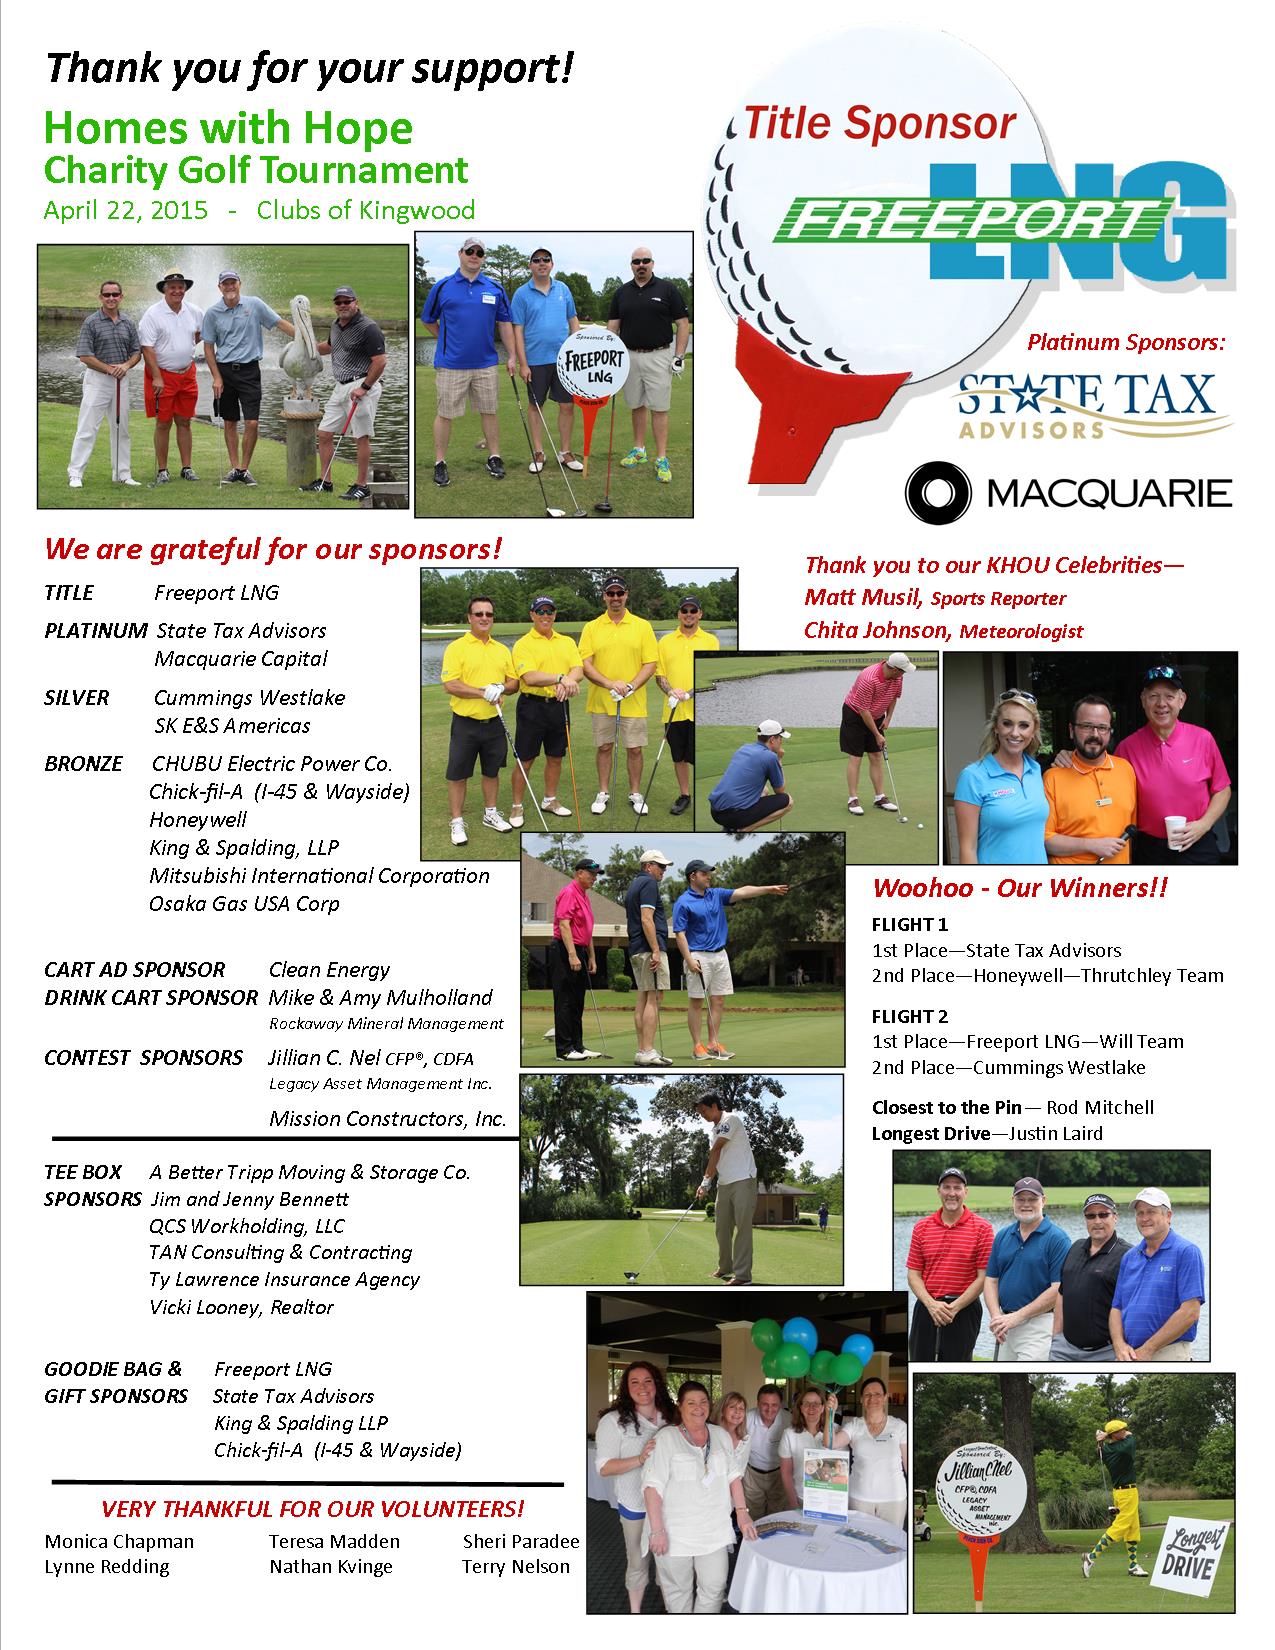 Thank You Photo Page GOLF 2015